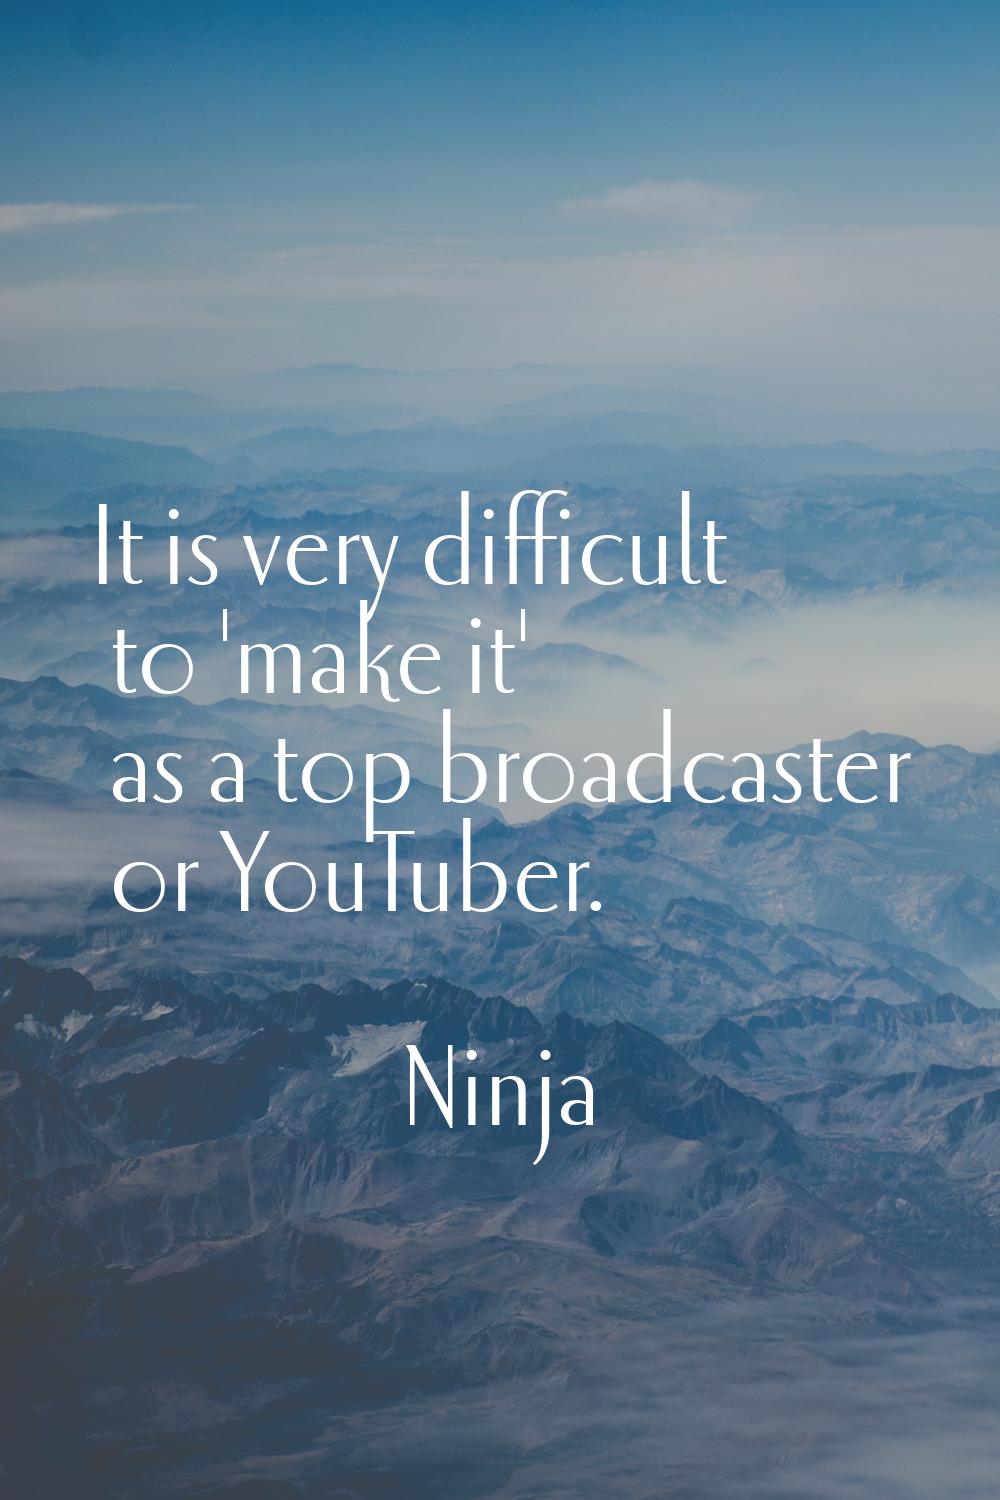 It is very difficult to 'make it' as a top broadcaster or YouTuber.